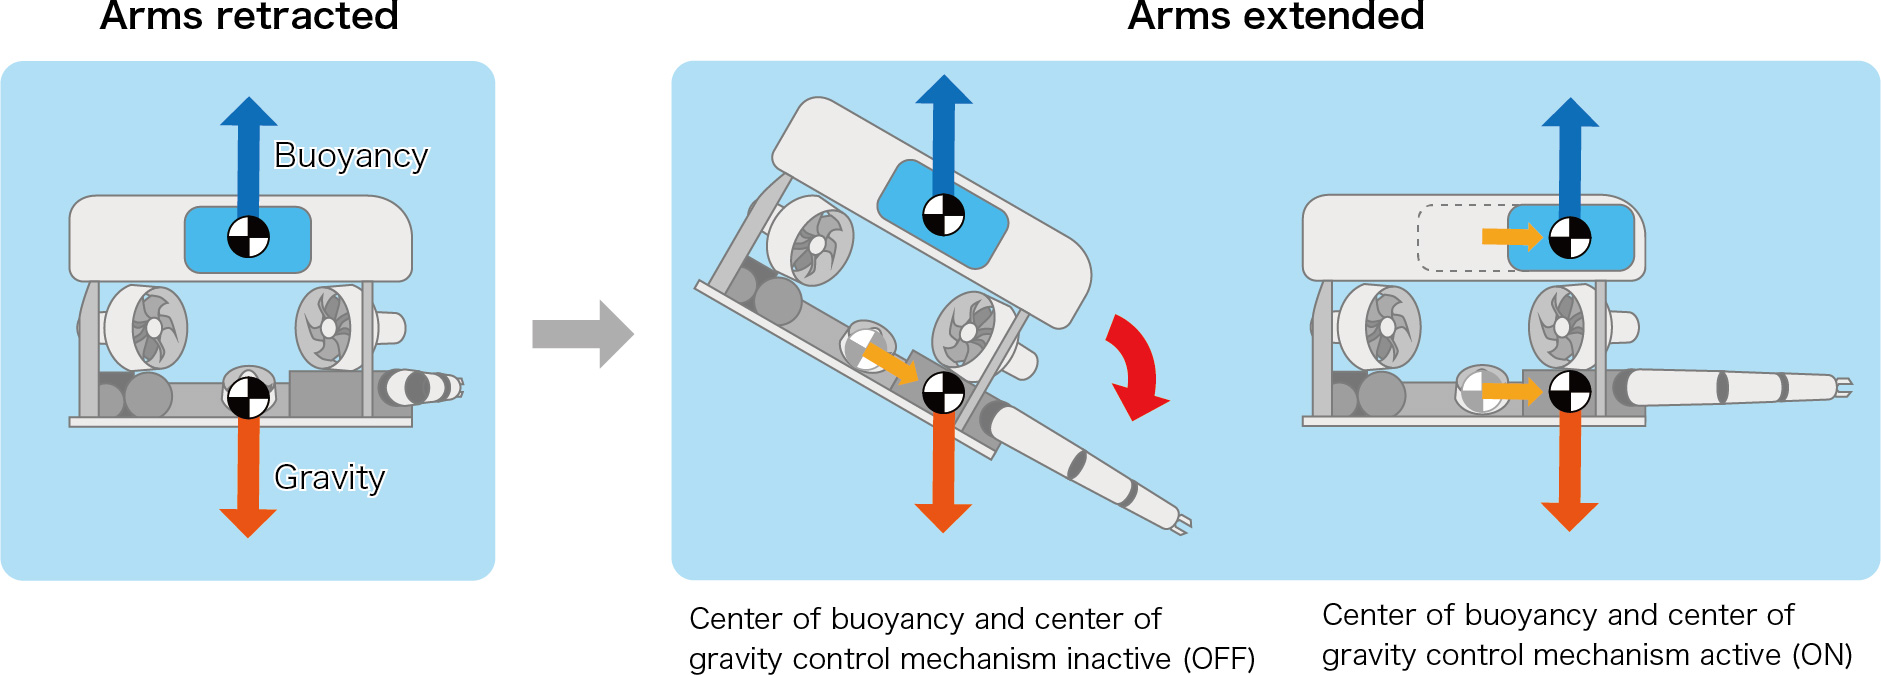 Effect of using the center of buoyancy and center of gravity control mechanism (comparison between active and inactive states)